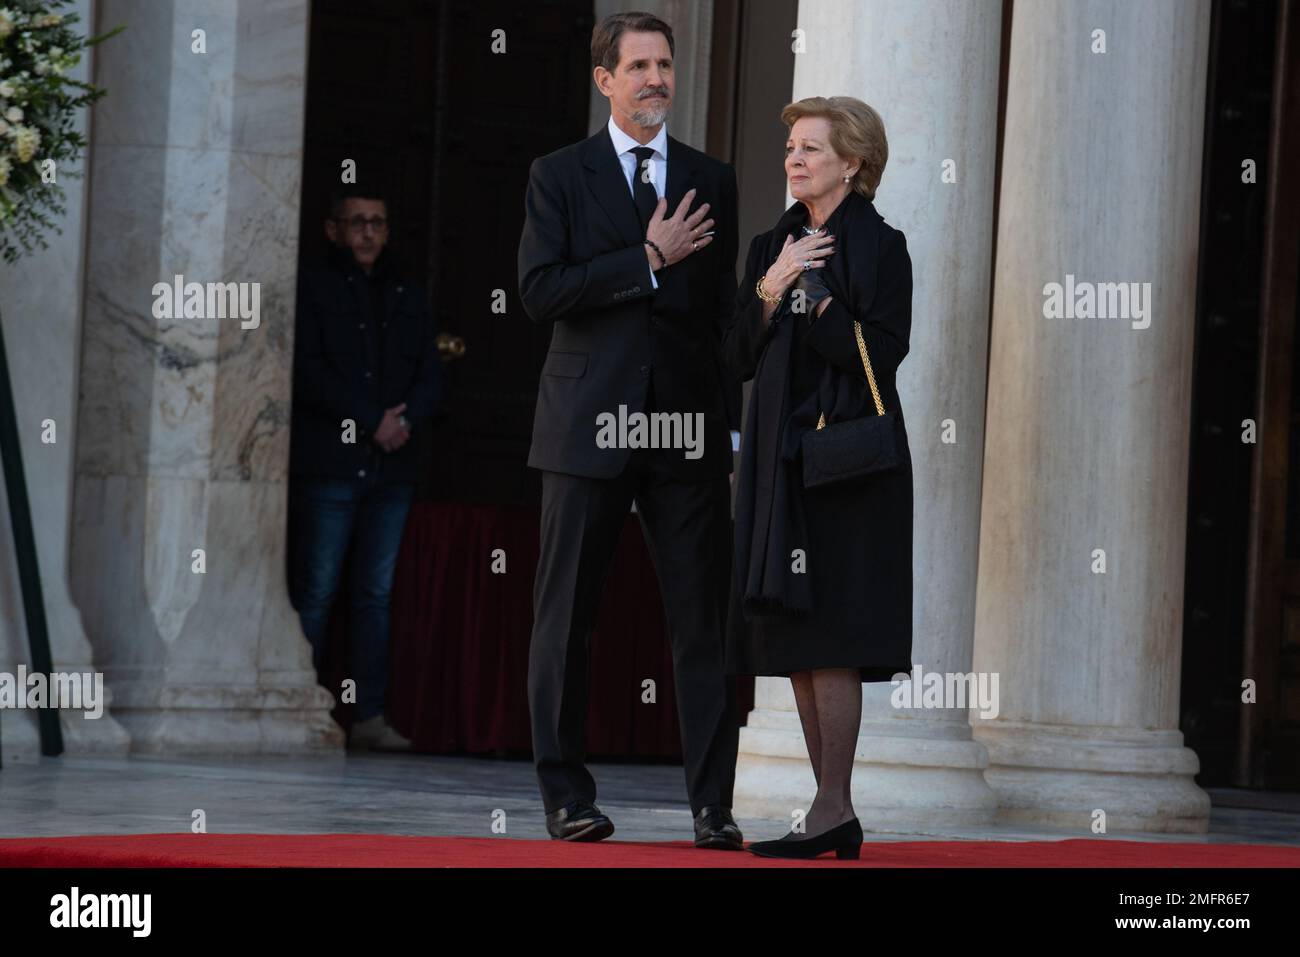 Athens, Greece. 16th January 2023. Crown Prince Pavlos and Queen Anne-Marie at the funeral of the former King Constantine II of Greece at the Metropolitan Cathedral of Athens. Credit: Nicolas Koutsokostas/Alamy Stock Photo. Stock Photo